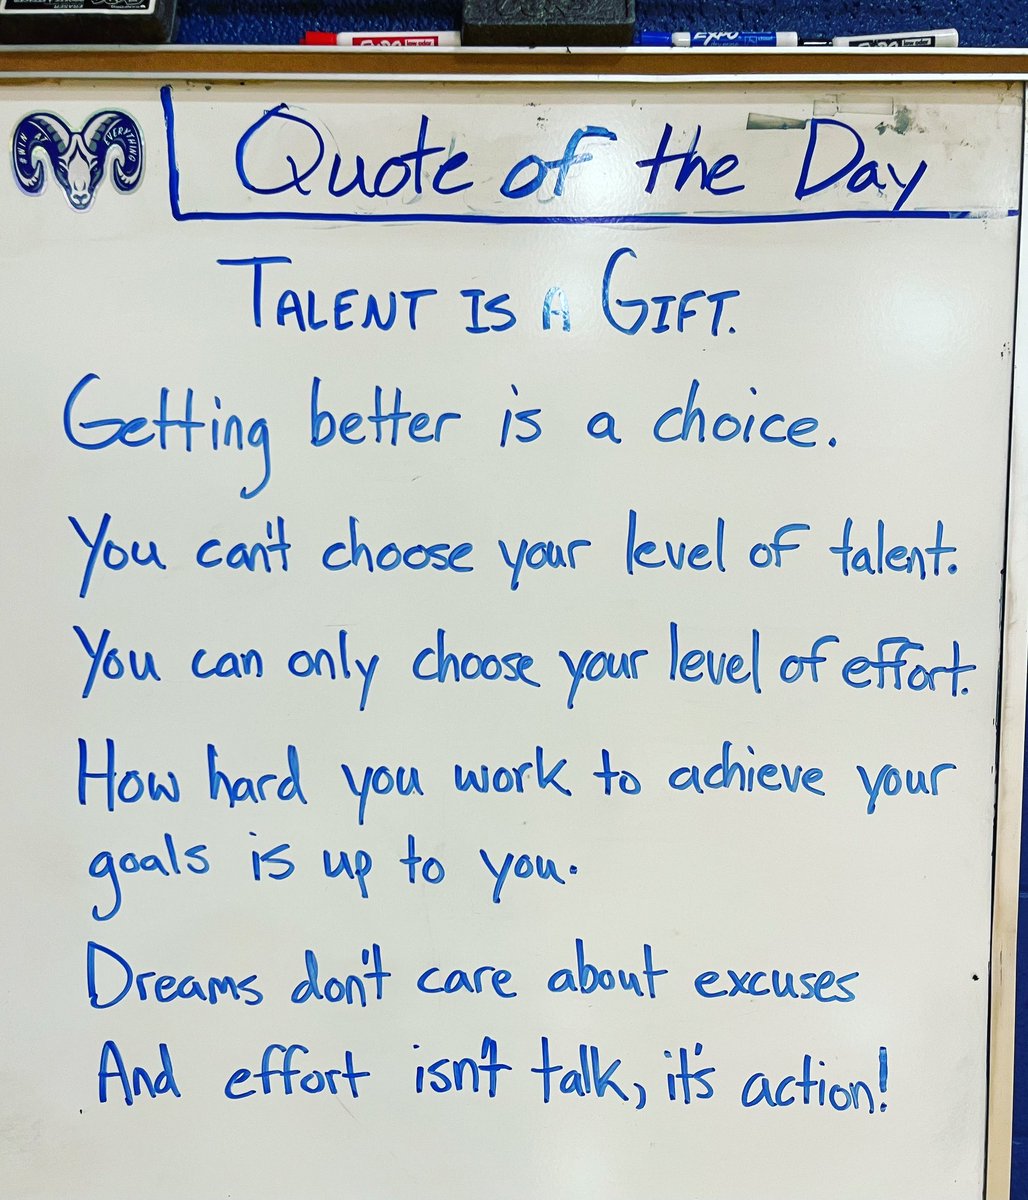 Talent is a gift. Improvement is a choice.